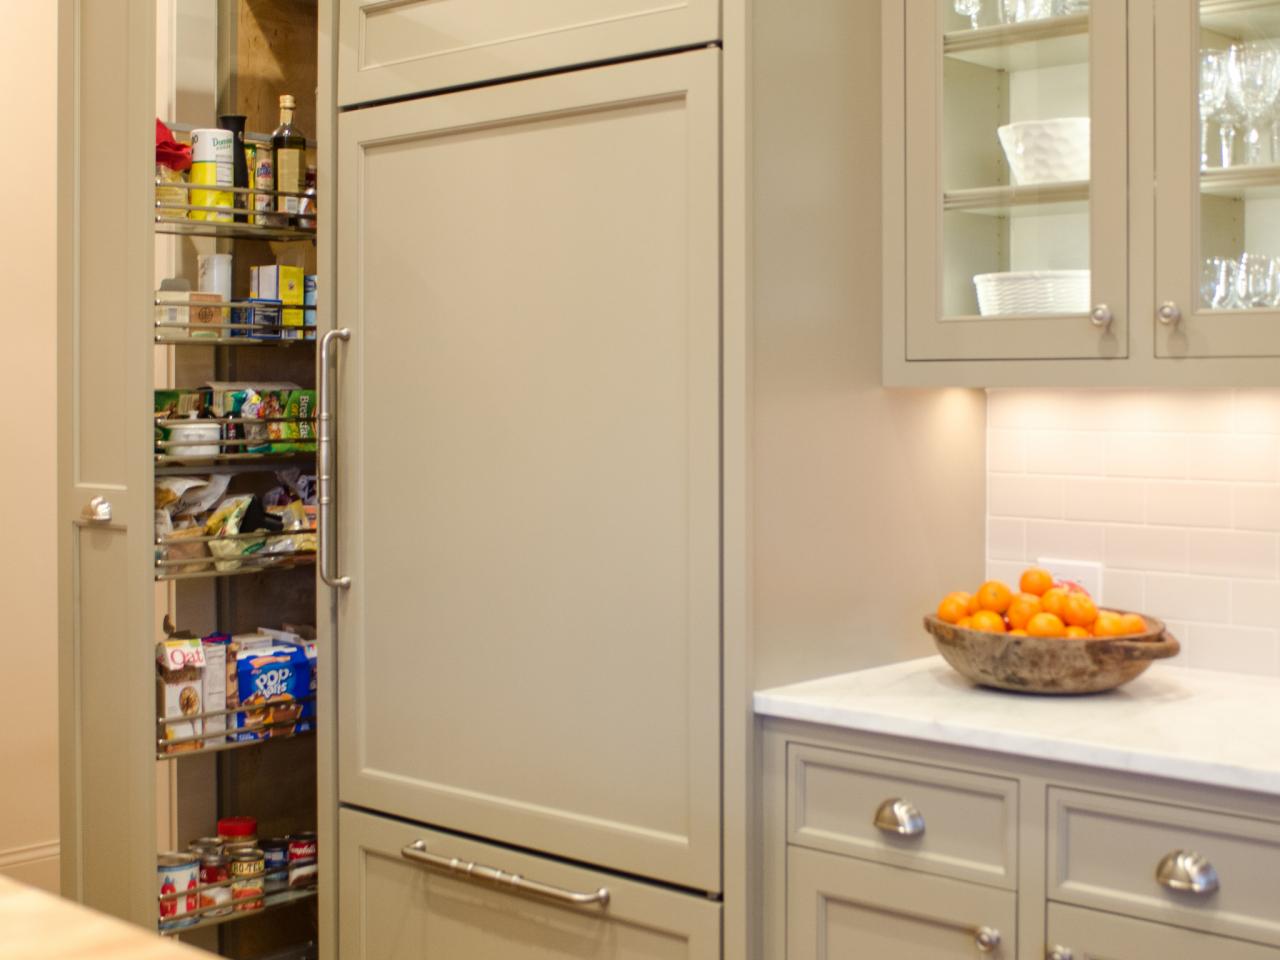 Pantry Cabinet Plans Pictures Options, Kitchen Cabinet Pantry Design